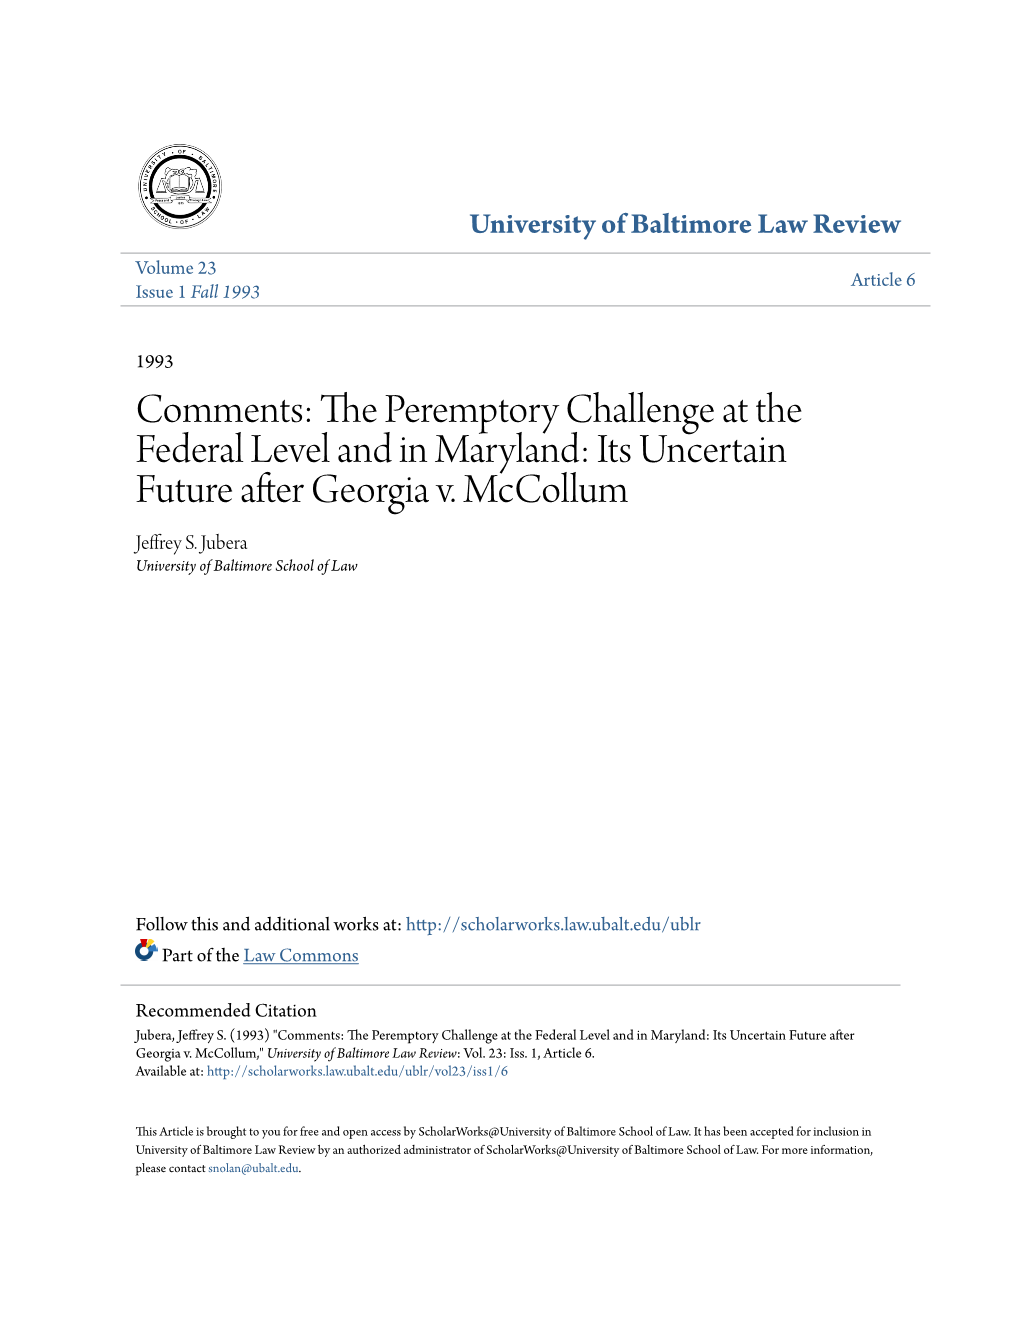 THE PEREMPTORY CHALLENGE at the FEDERAL LEVEL and in MARYLAND: ITS UNCERTAIN FUTURE AFTER GEORGIA V